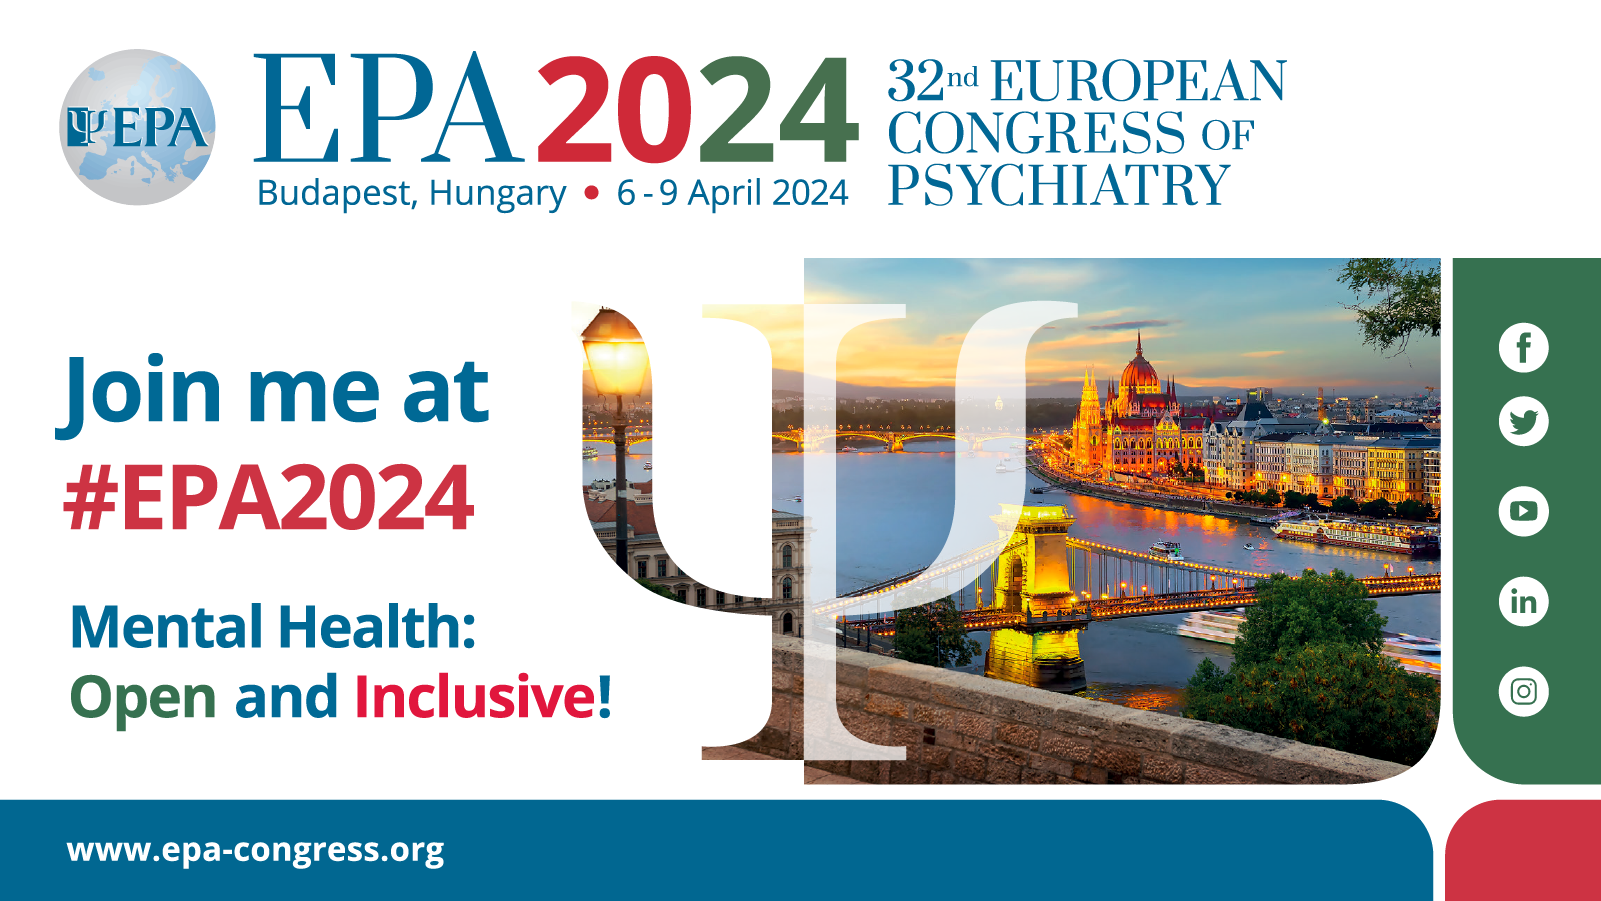 Social Toolkit - Join me - 1600x900px: EPA2024 Budapest, Hungary. 6 -9 April 2024. 32nd european congress of psychiatry. Mental Health: Open and Inclusive! #EPA2024